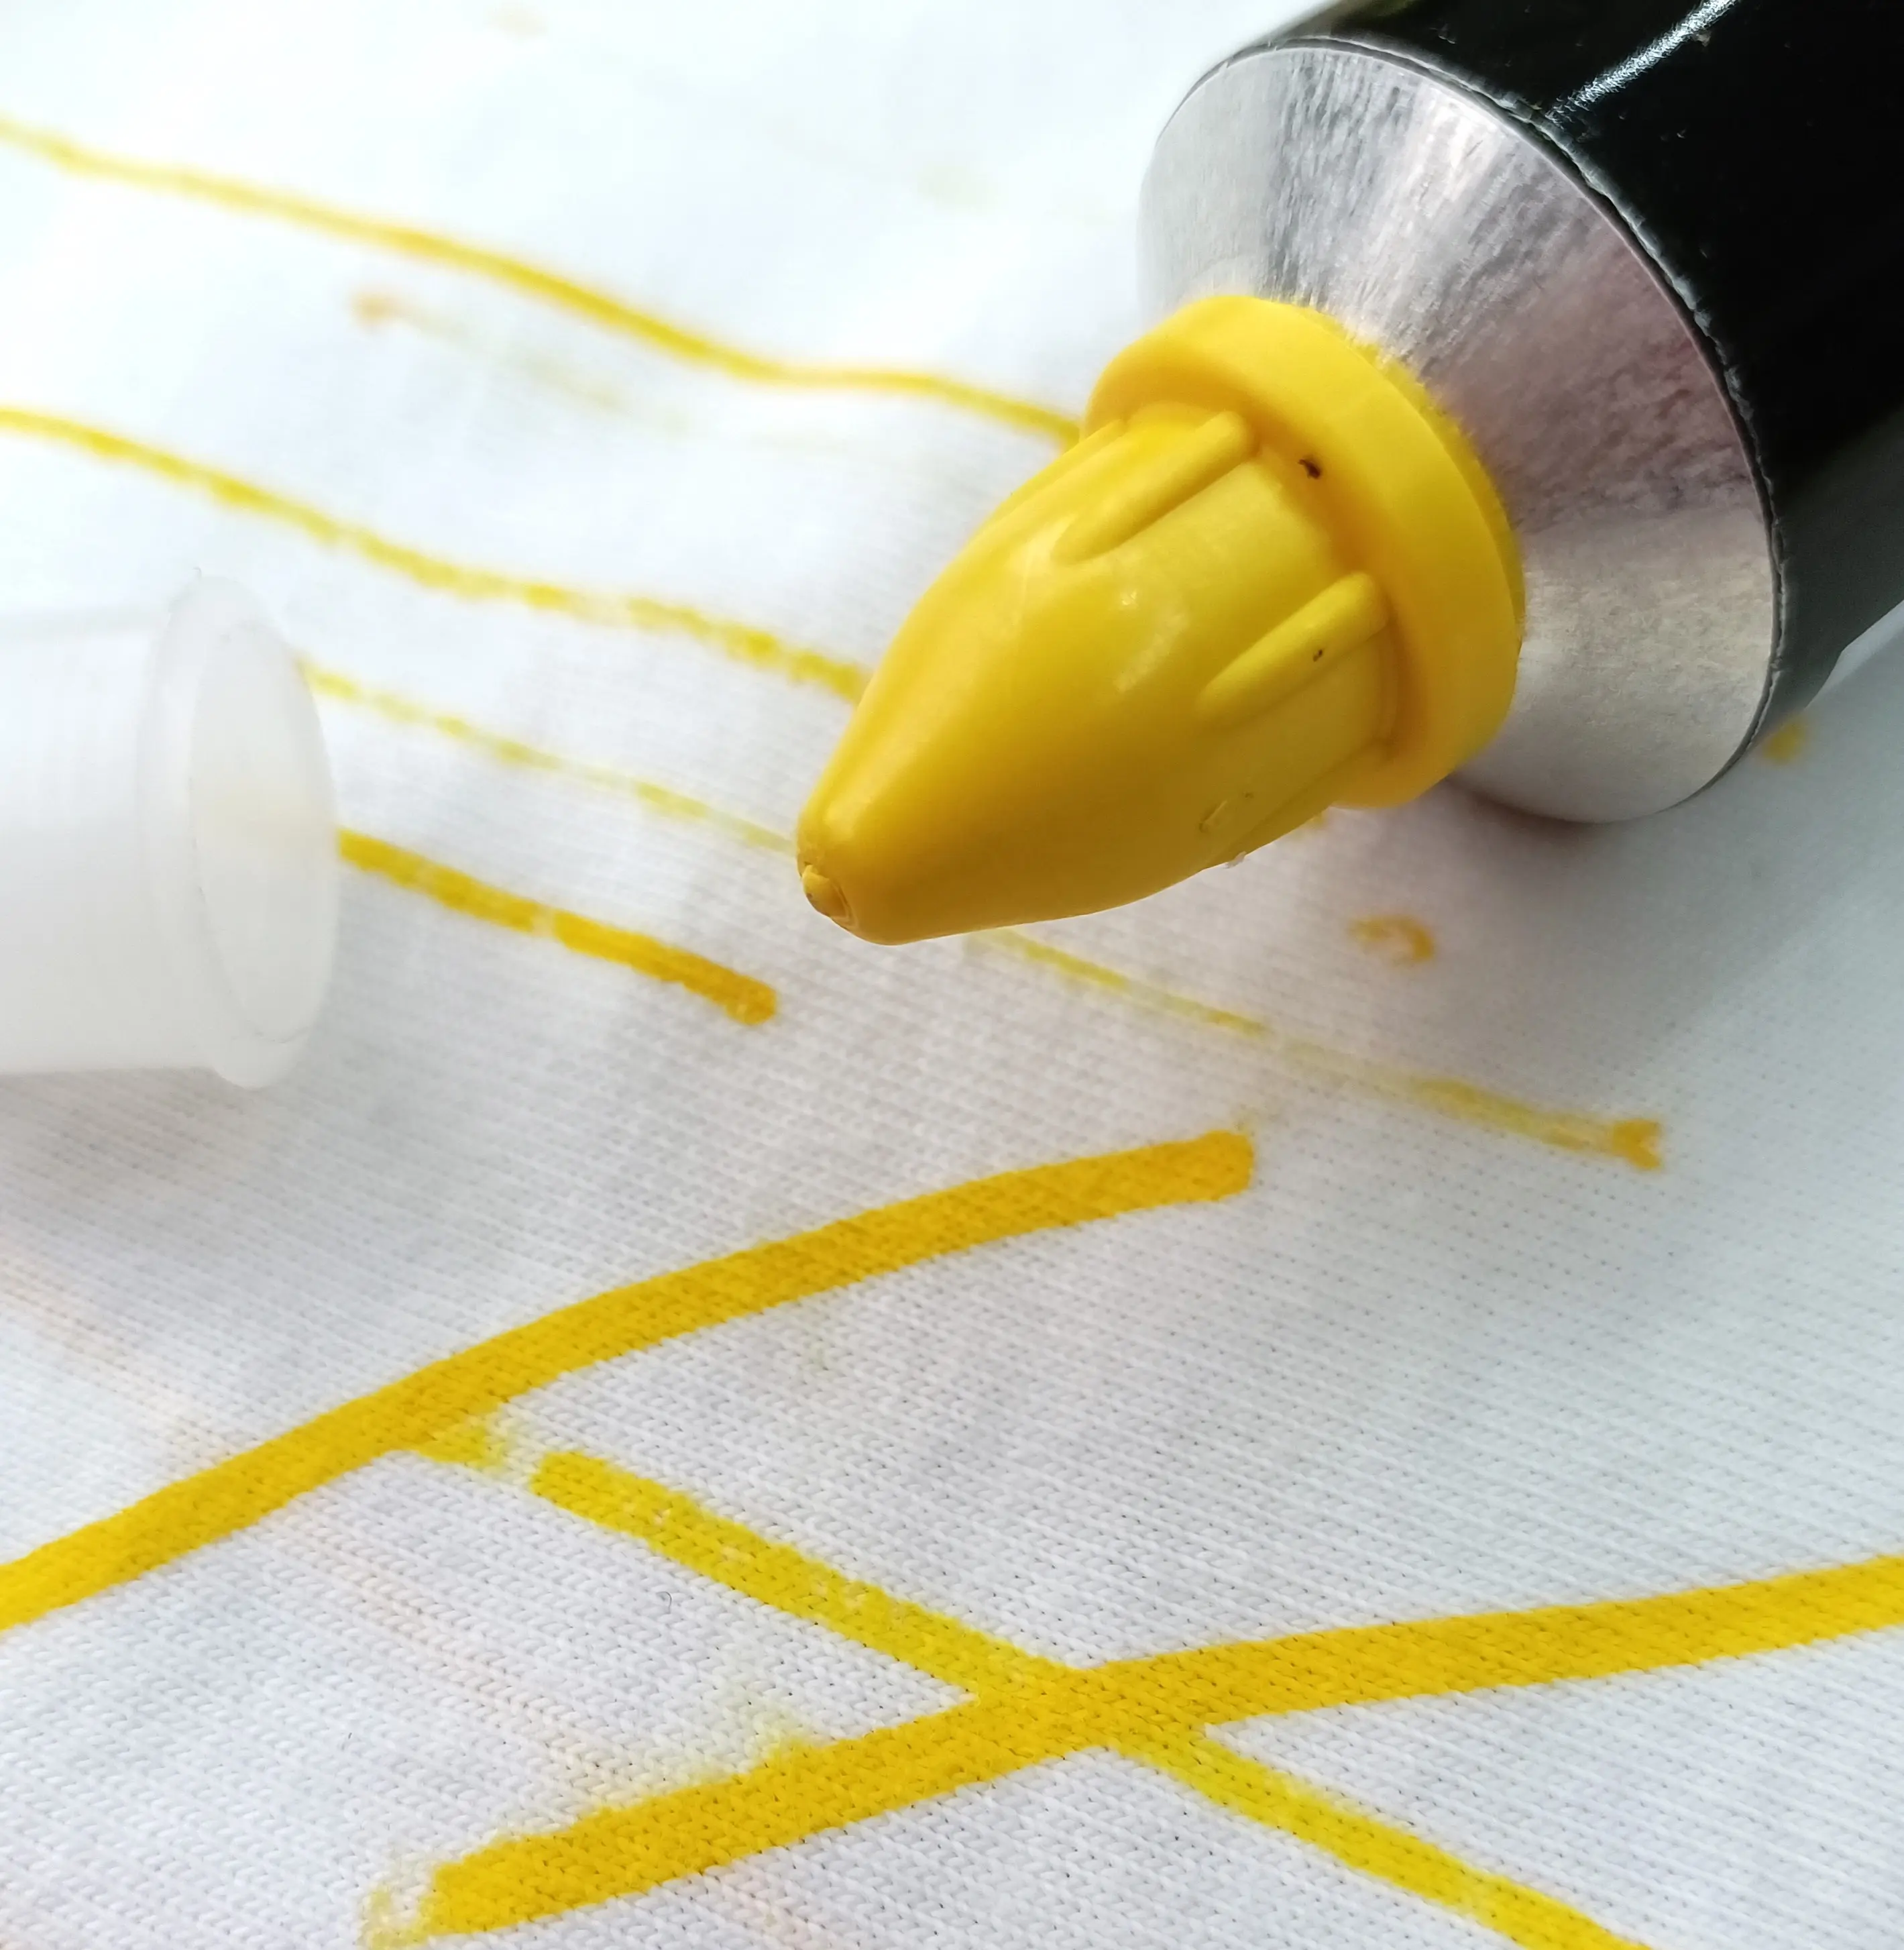 VAST SEA Wholesale Yellow 90g Permanent Toothpaste Textile Marker Pen For Fabric